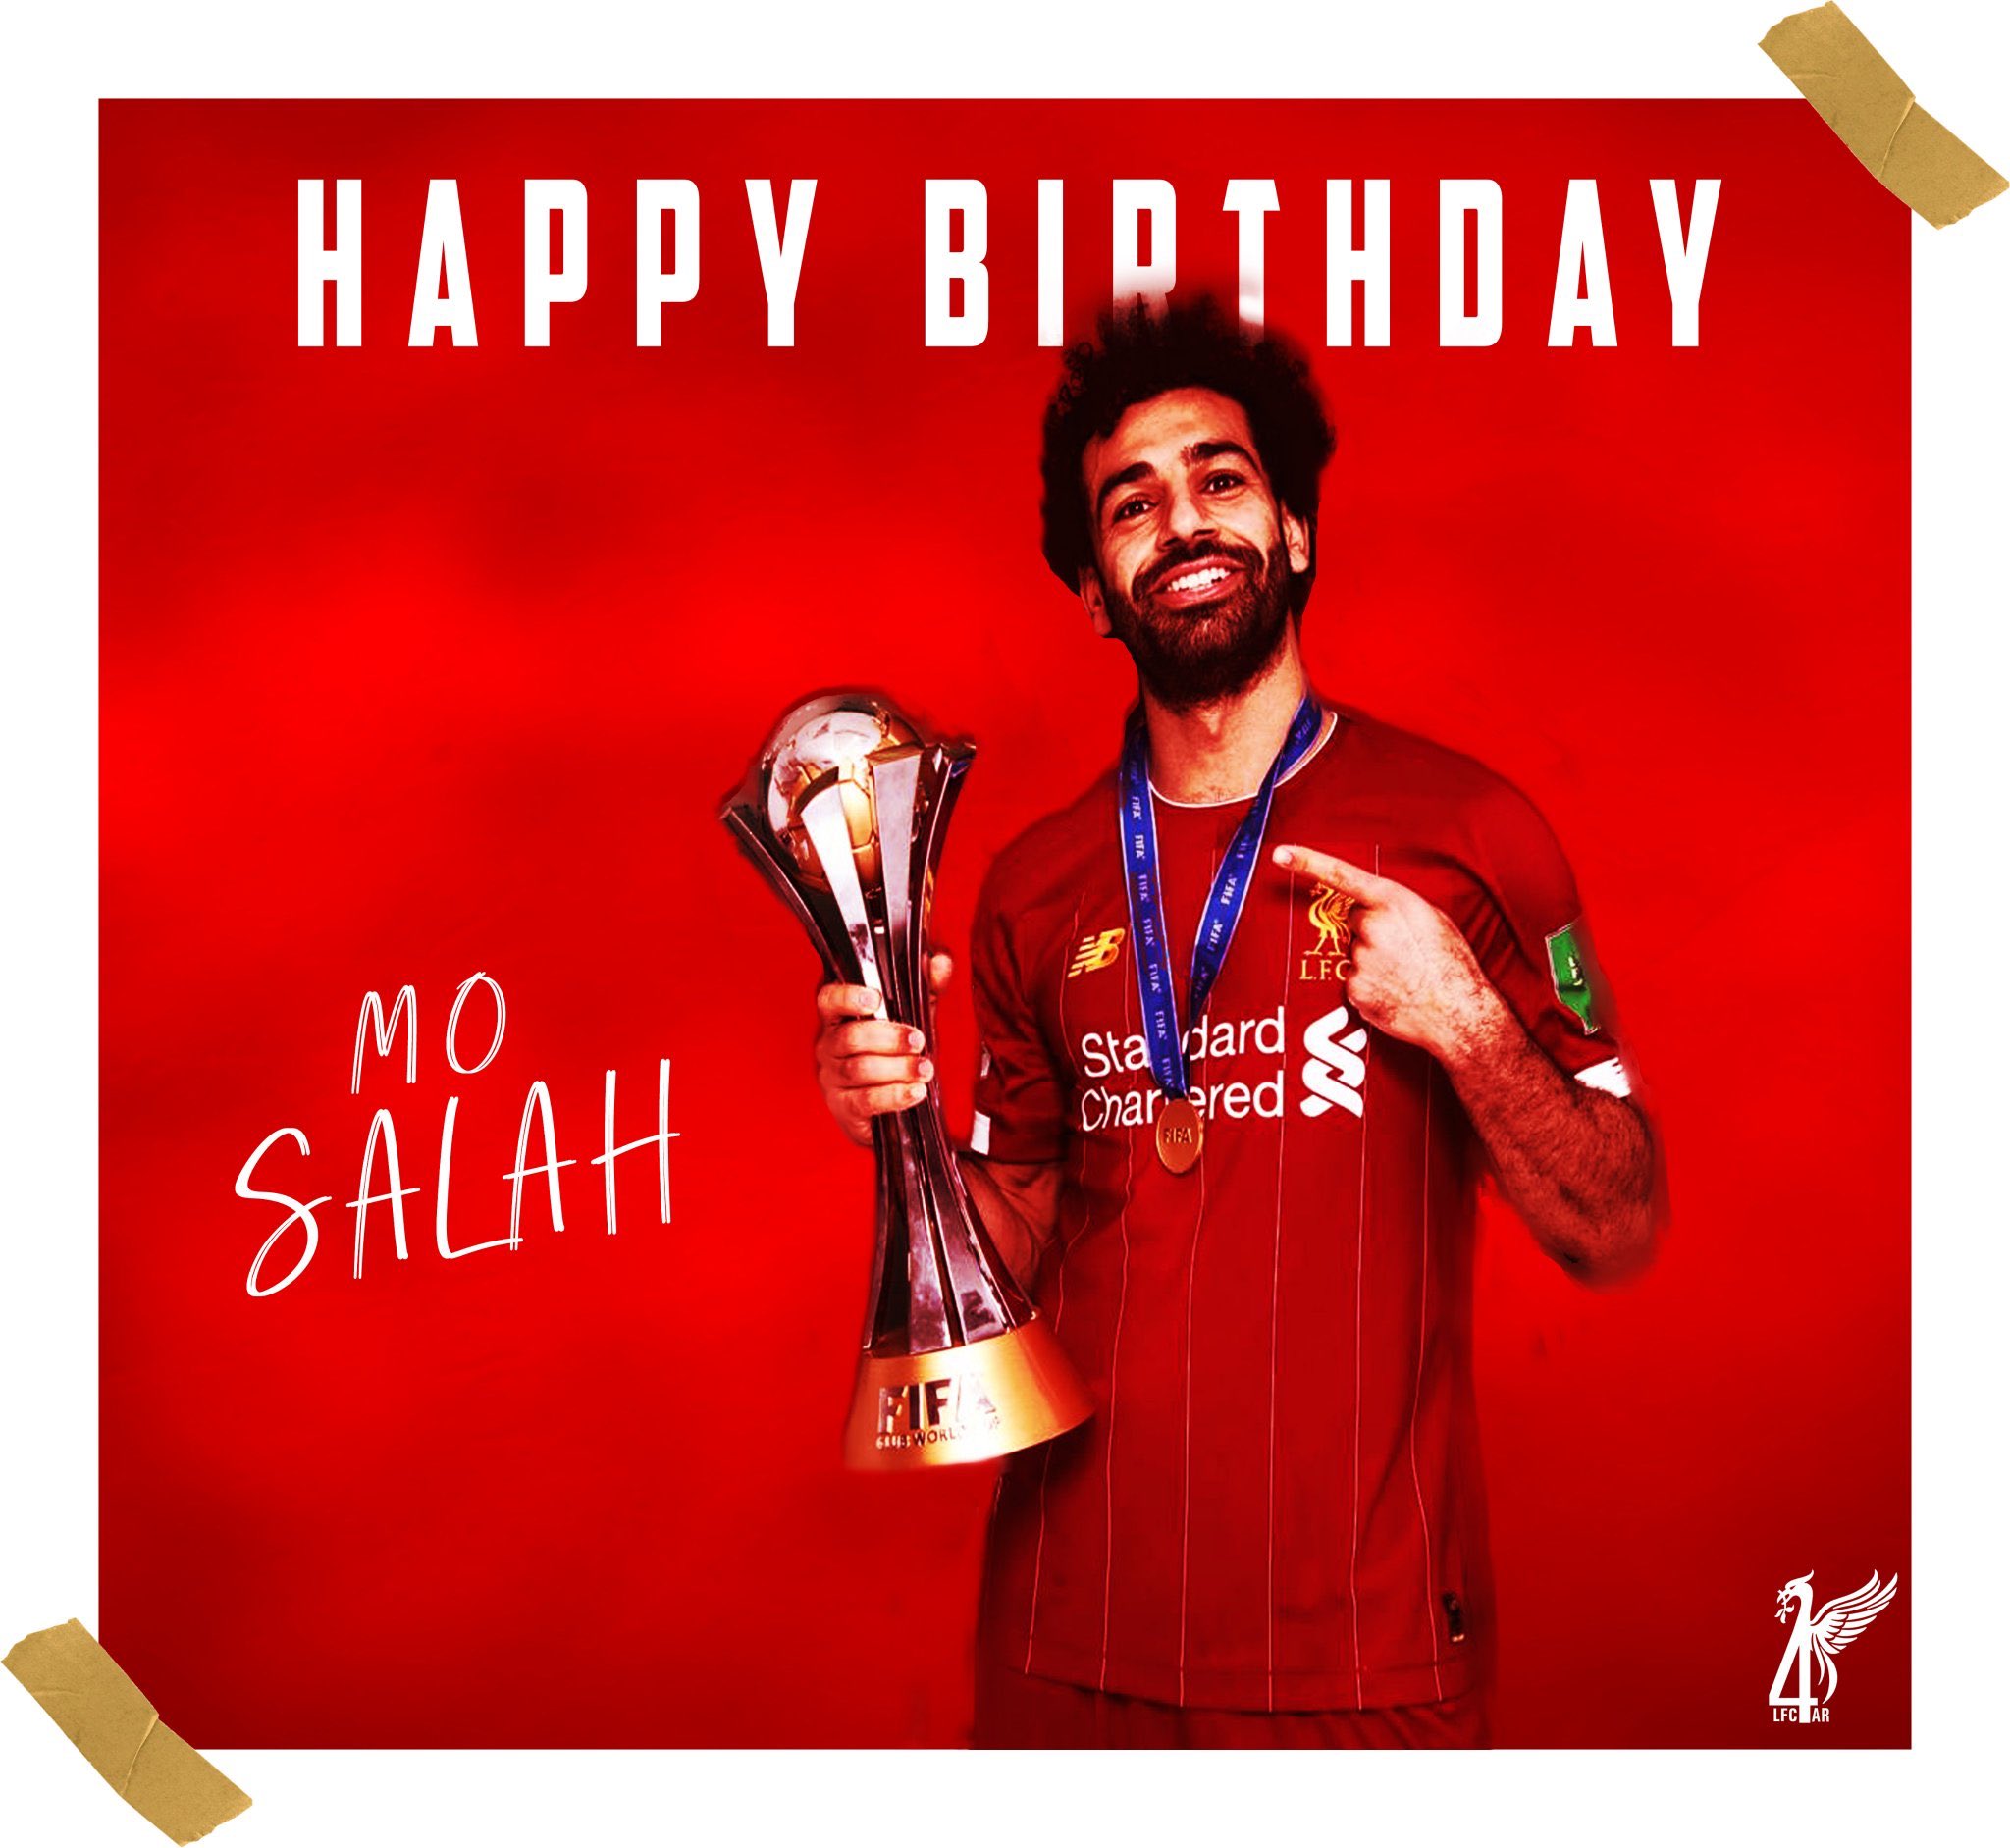  Happy birthday to Egyptian King Mohamed Salah who is celebrating his 28th year!     